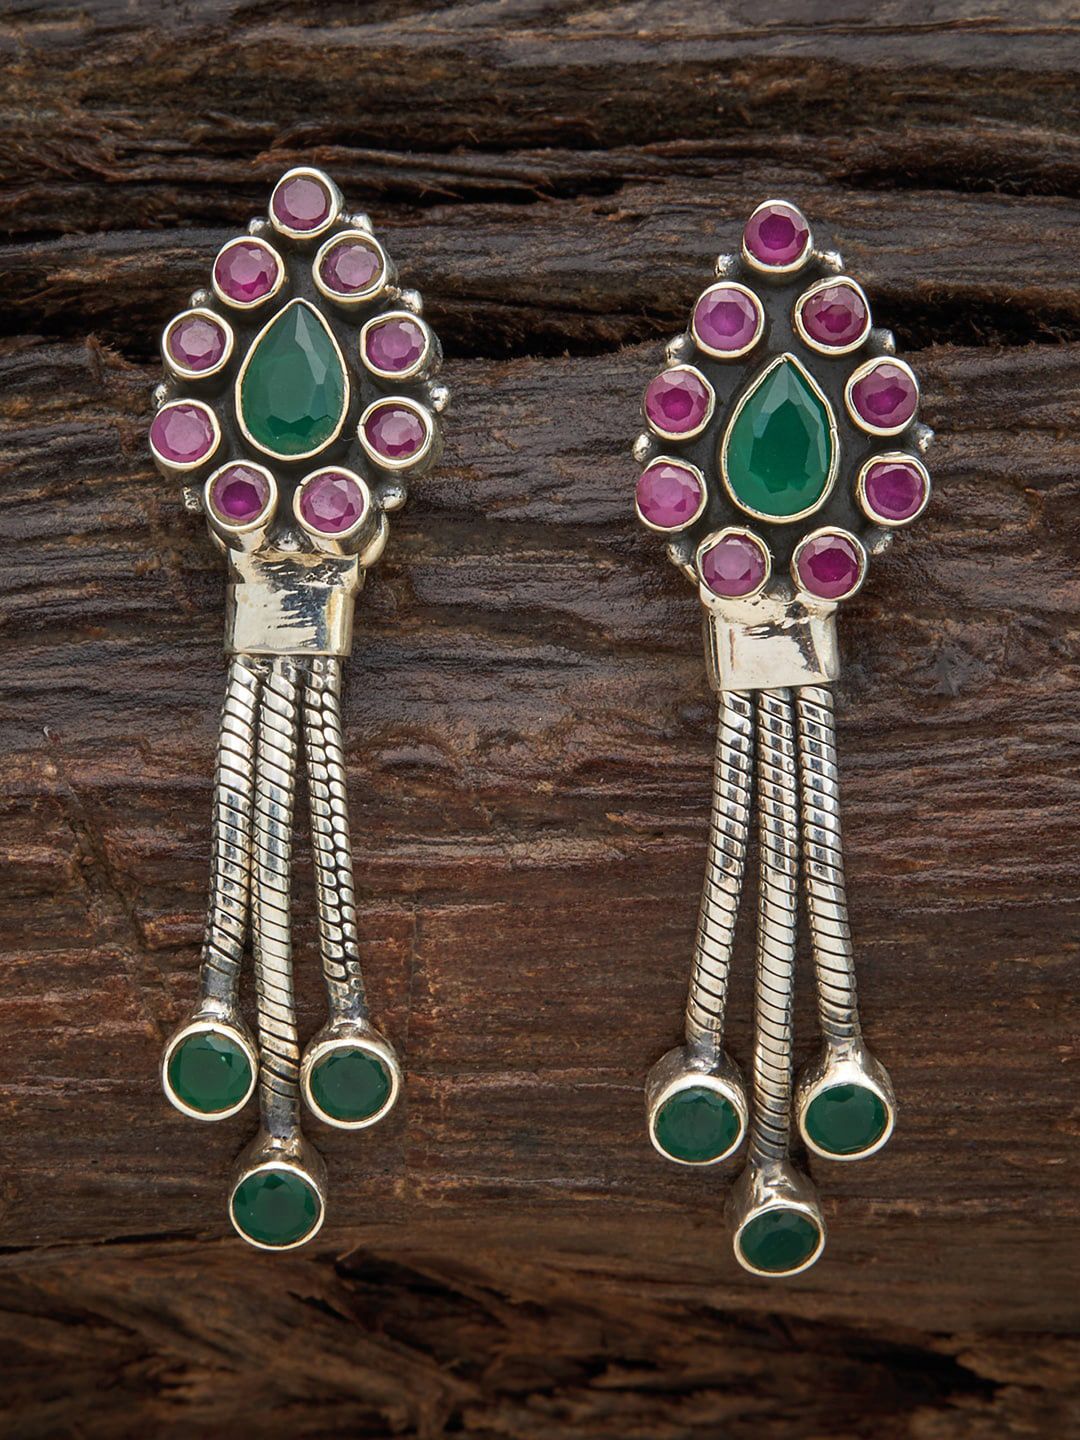 Kushal's Fashion Jewellery Red Teardrop Shaped Drop Earrings Price in India